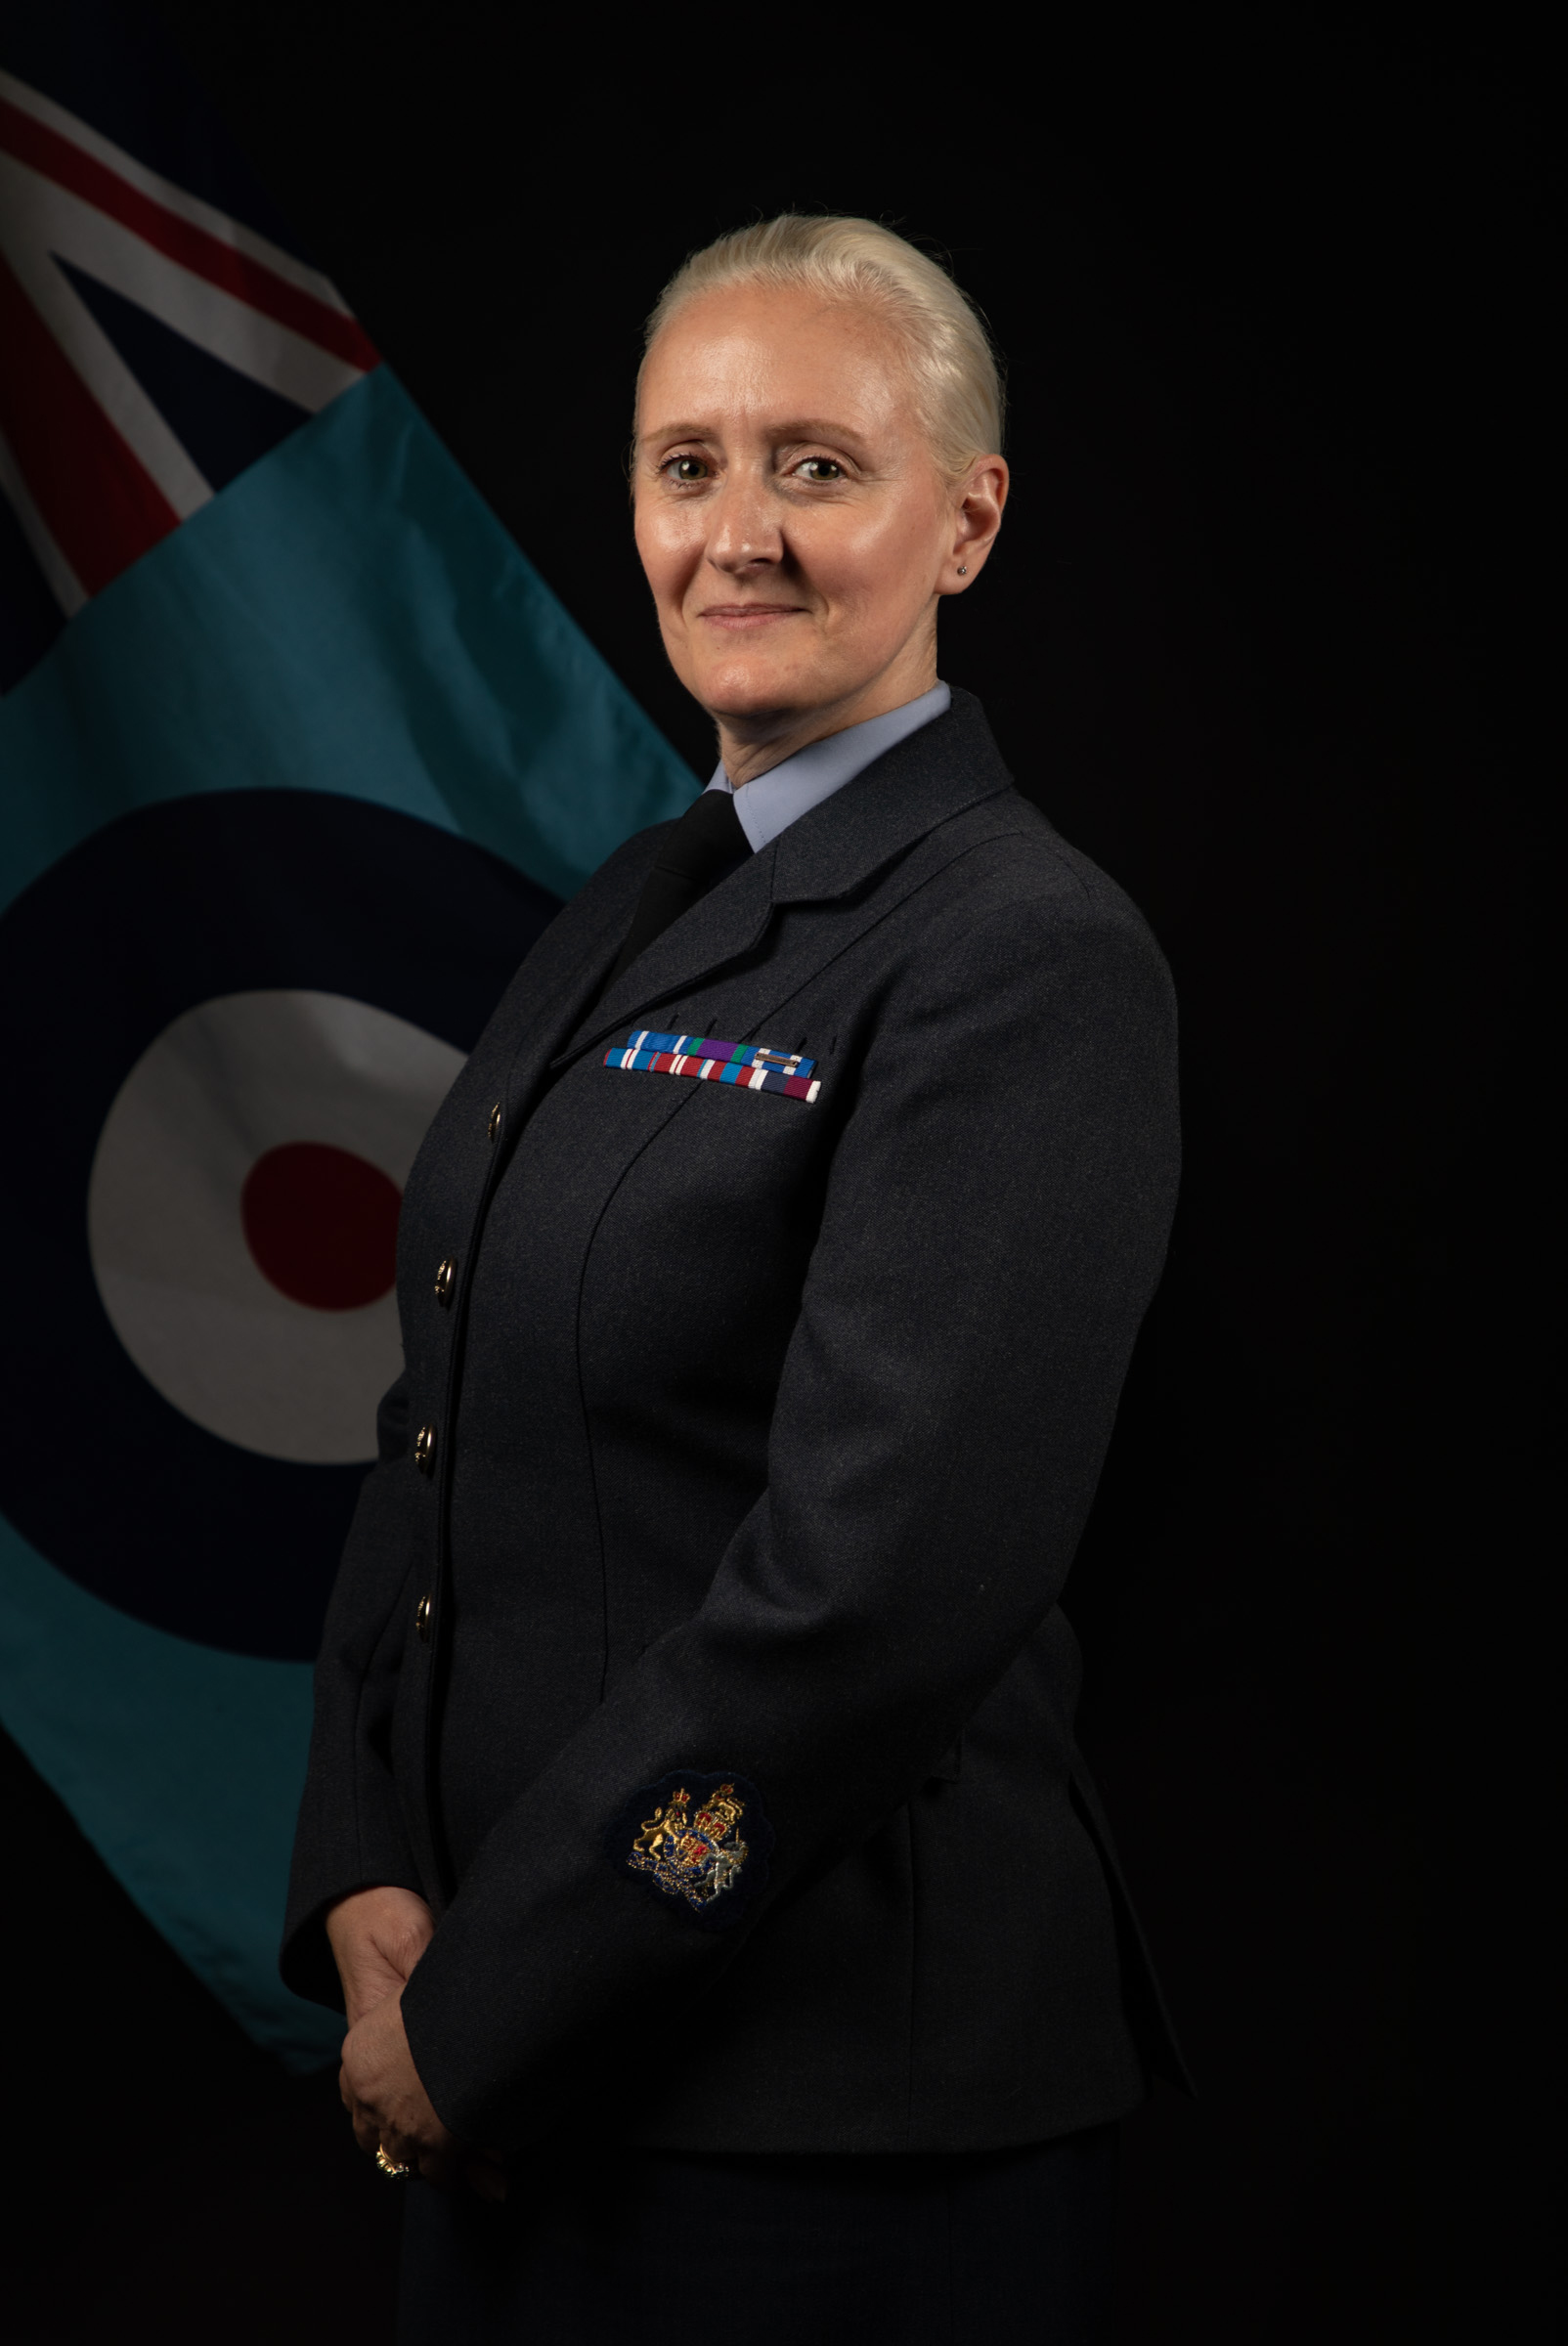 Warrant Officer Maxine Booth